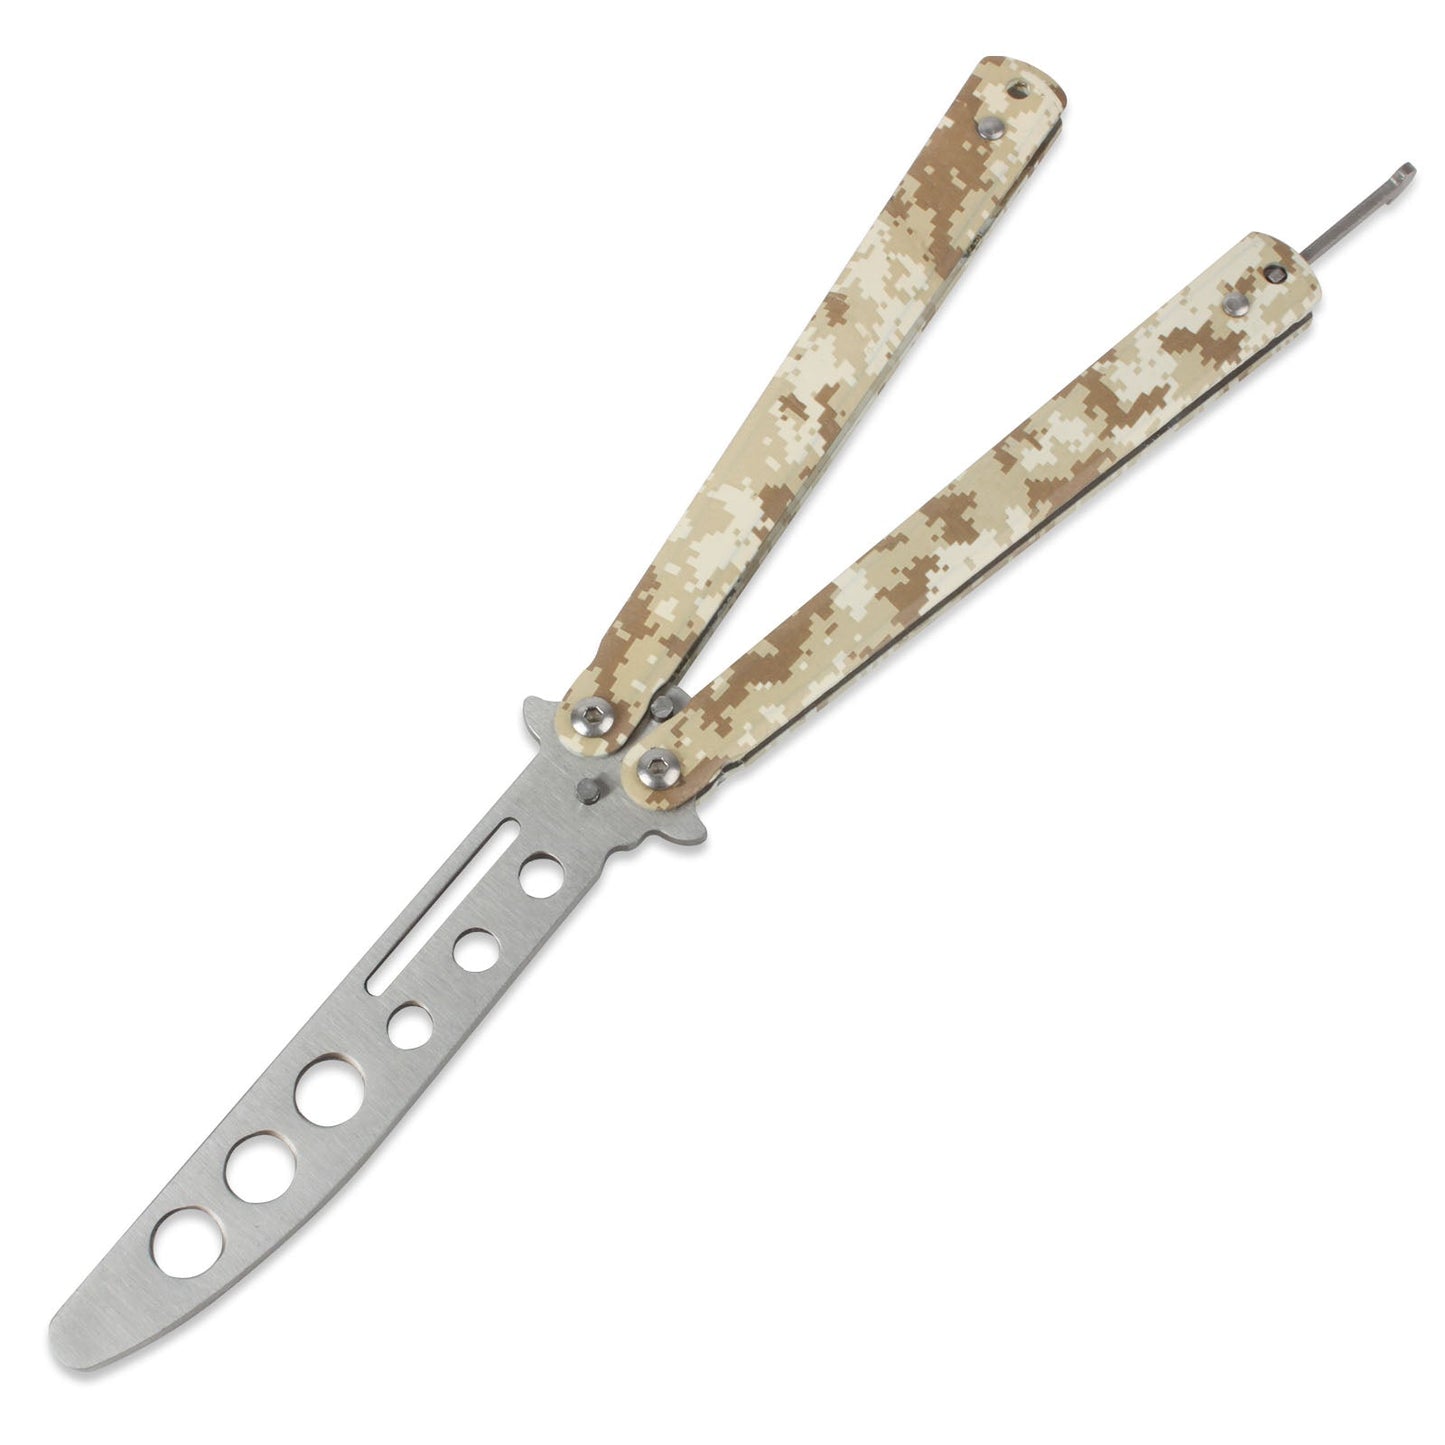 Andux Stainless Steel Balisong Camouflage